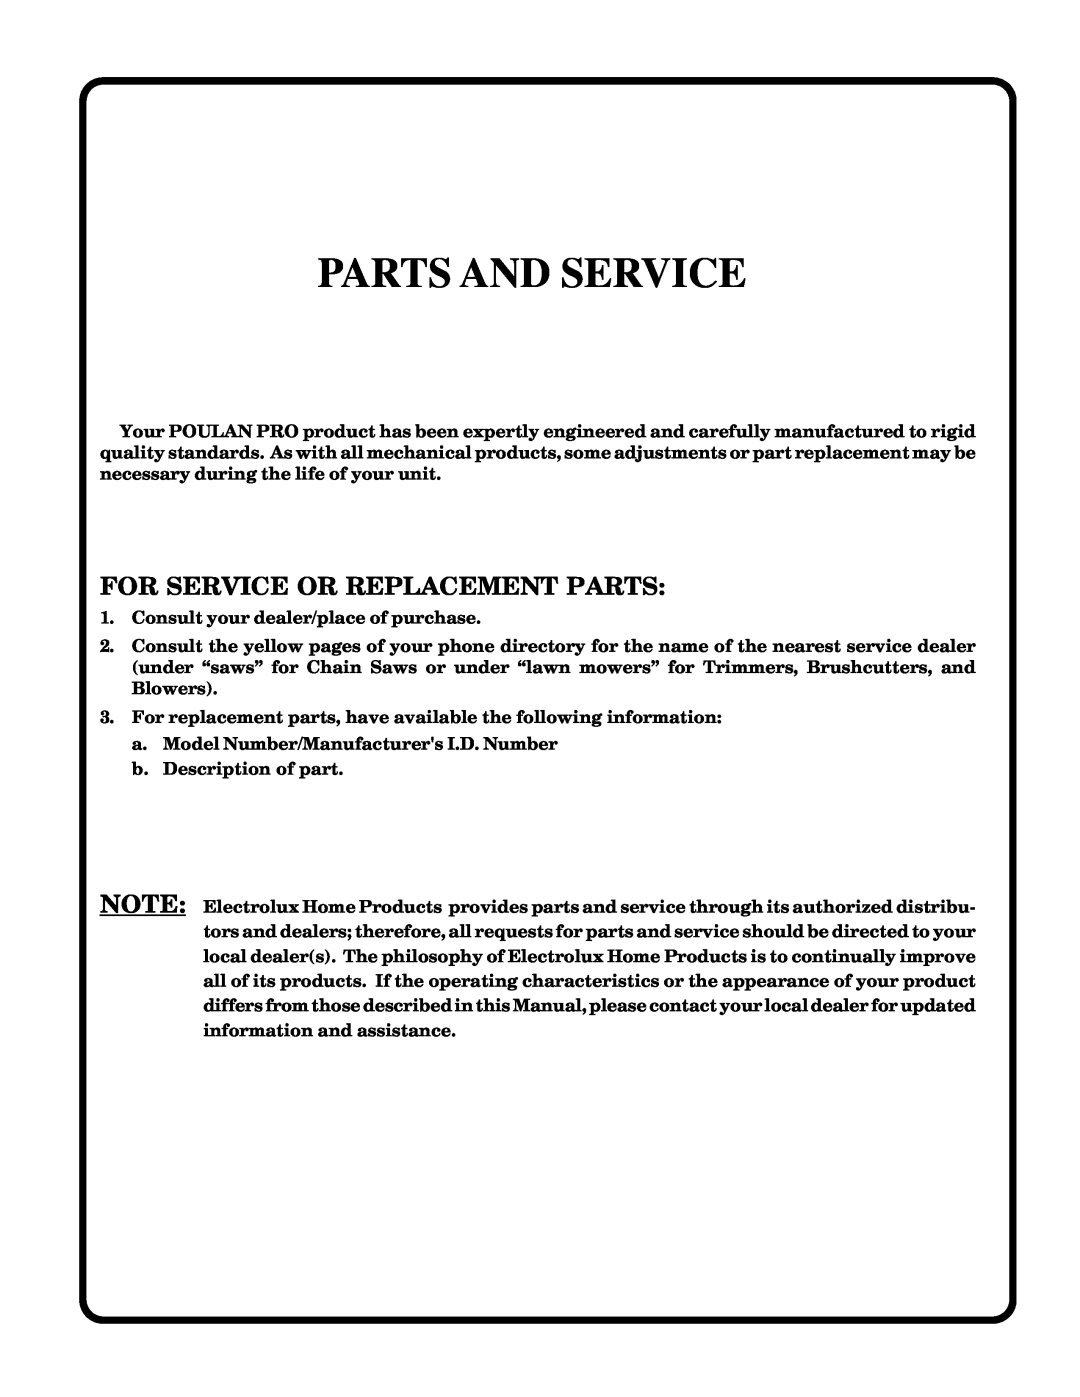 Poulan 177545 owner manual Parts And Service, For Service Or Replacement Parts 